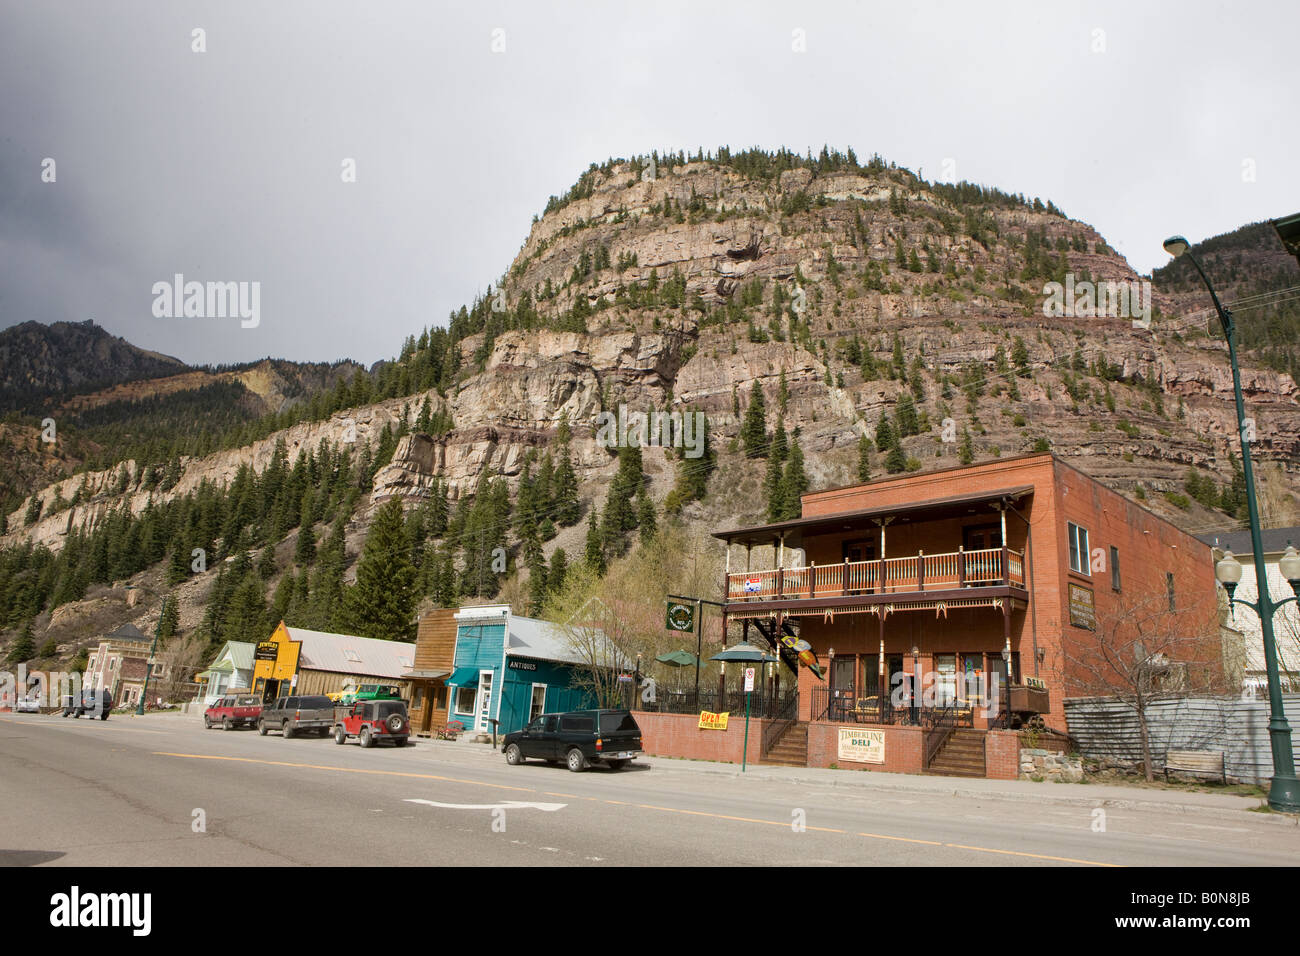 Shops line Main Street San Juan Skyway in Ouray Colorado small town nestled in the mountains nicknamed 'Switzerland of America' Stock Photo